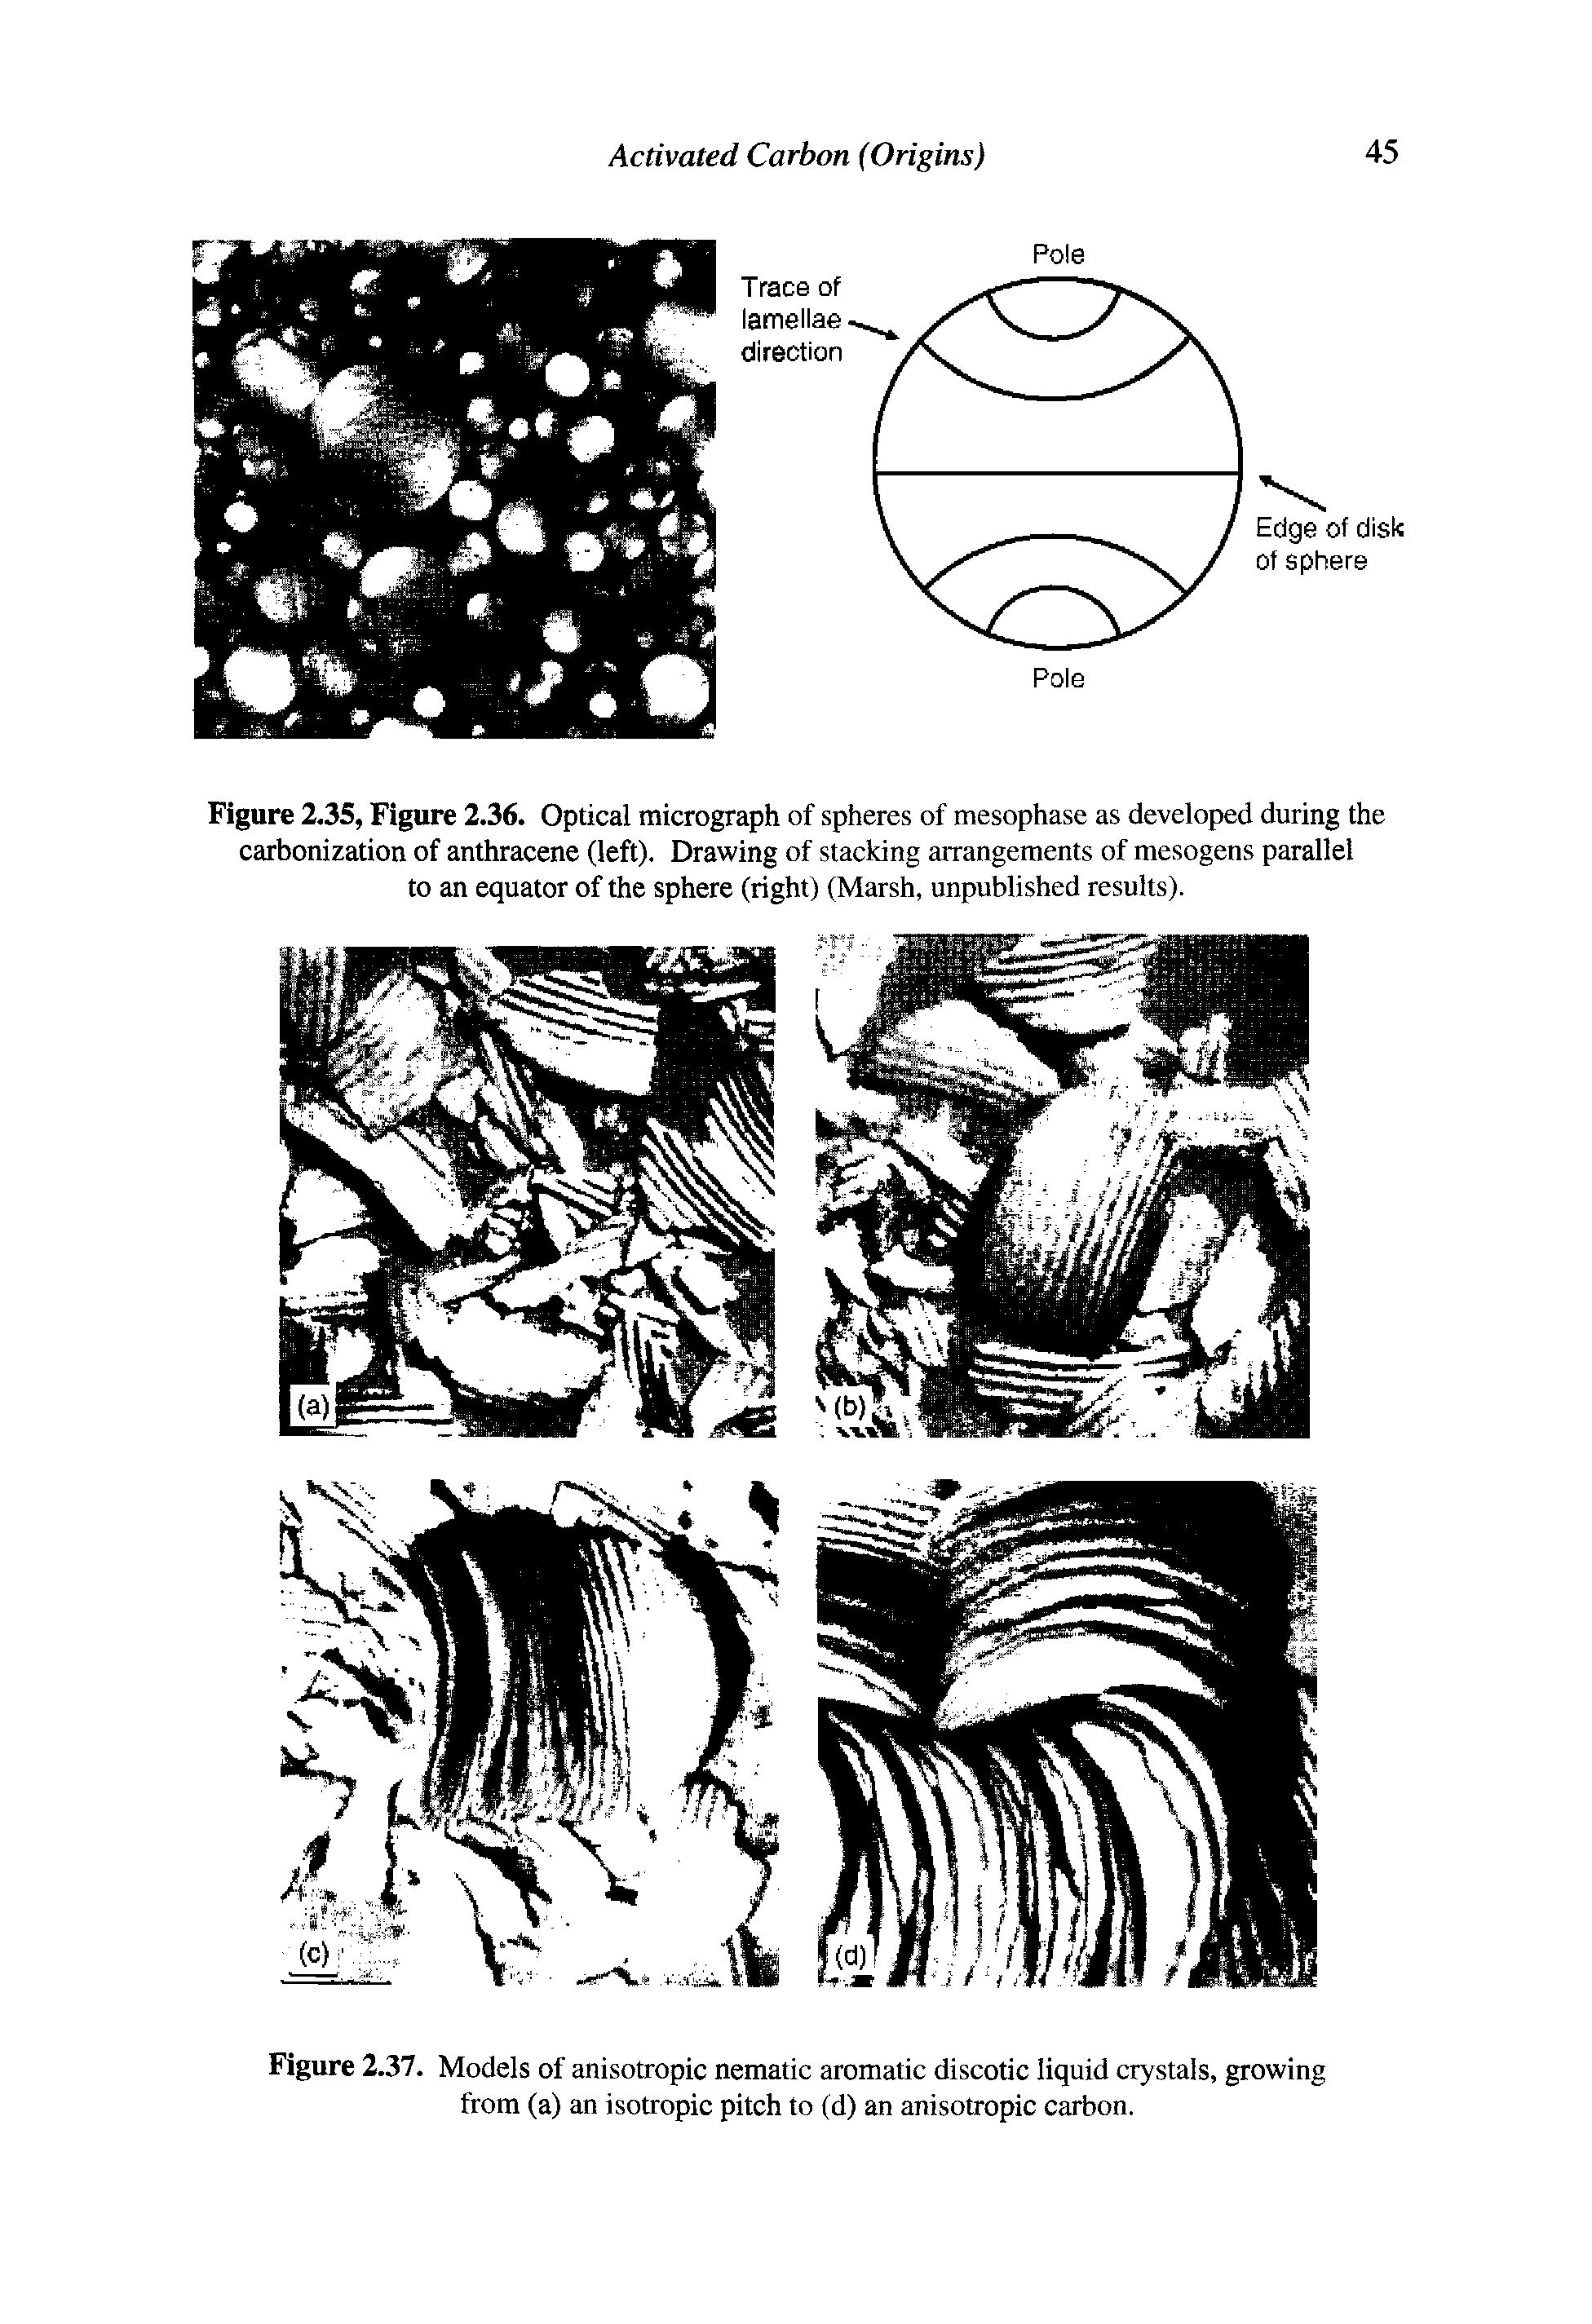 Figure 2.3S, Figure 2.36. Optical micrograph of spheres of mesophase as developed during the carbonization of anthracene (left). Drawing of stacking arrangements of mesogens parallel to an equator of the sphere (right) (Marsh, unpublished results).